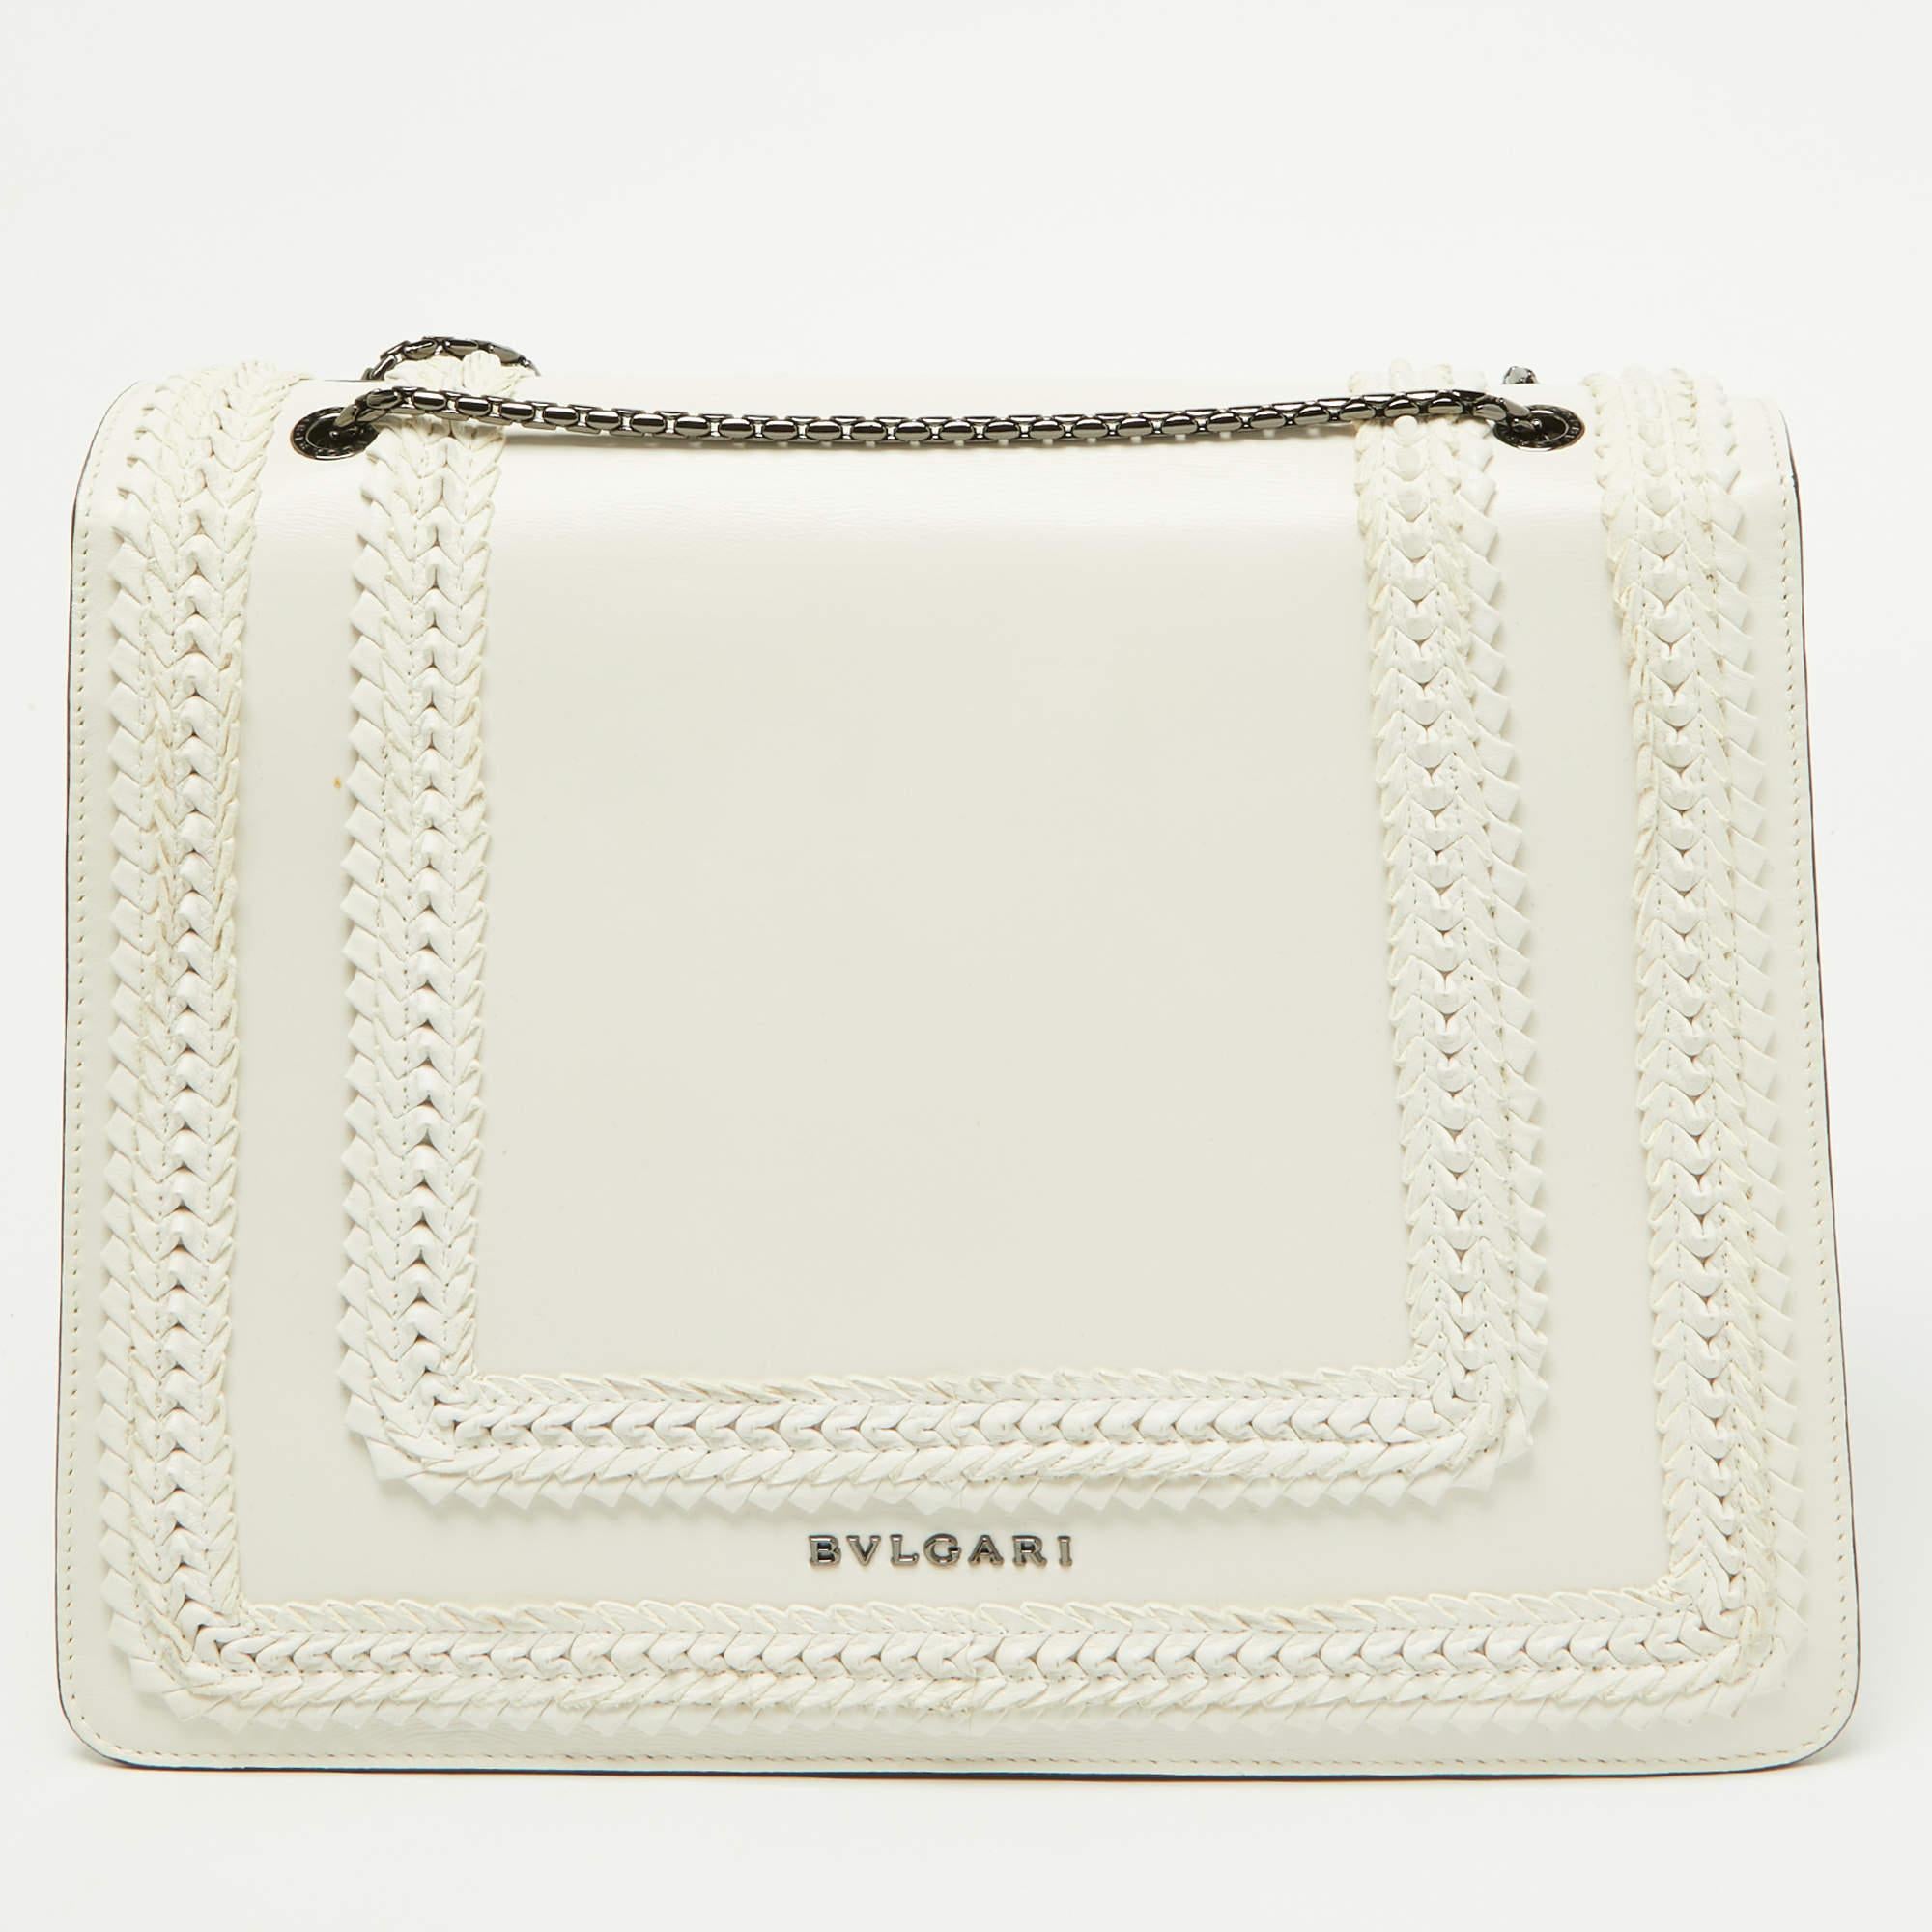 Bvlgari Off White Leather Large Serpenti Forever Shoulder Bag 6